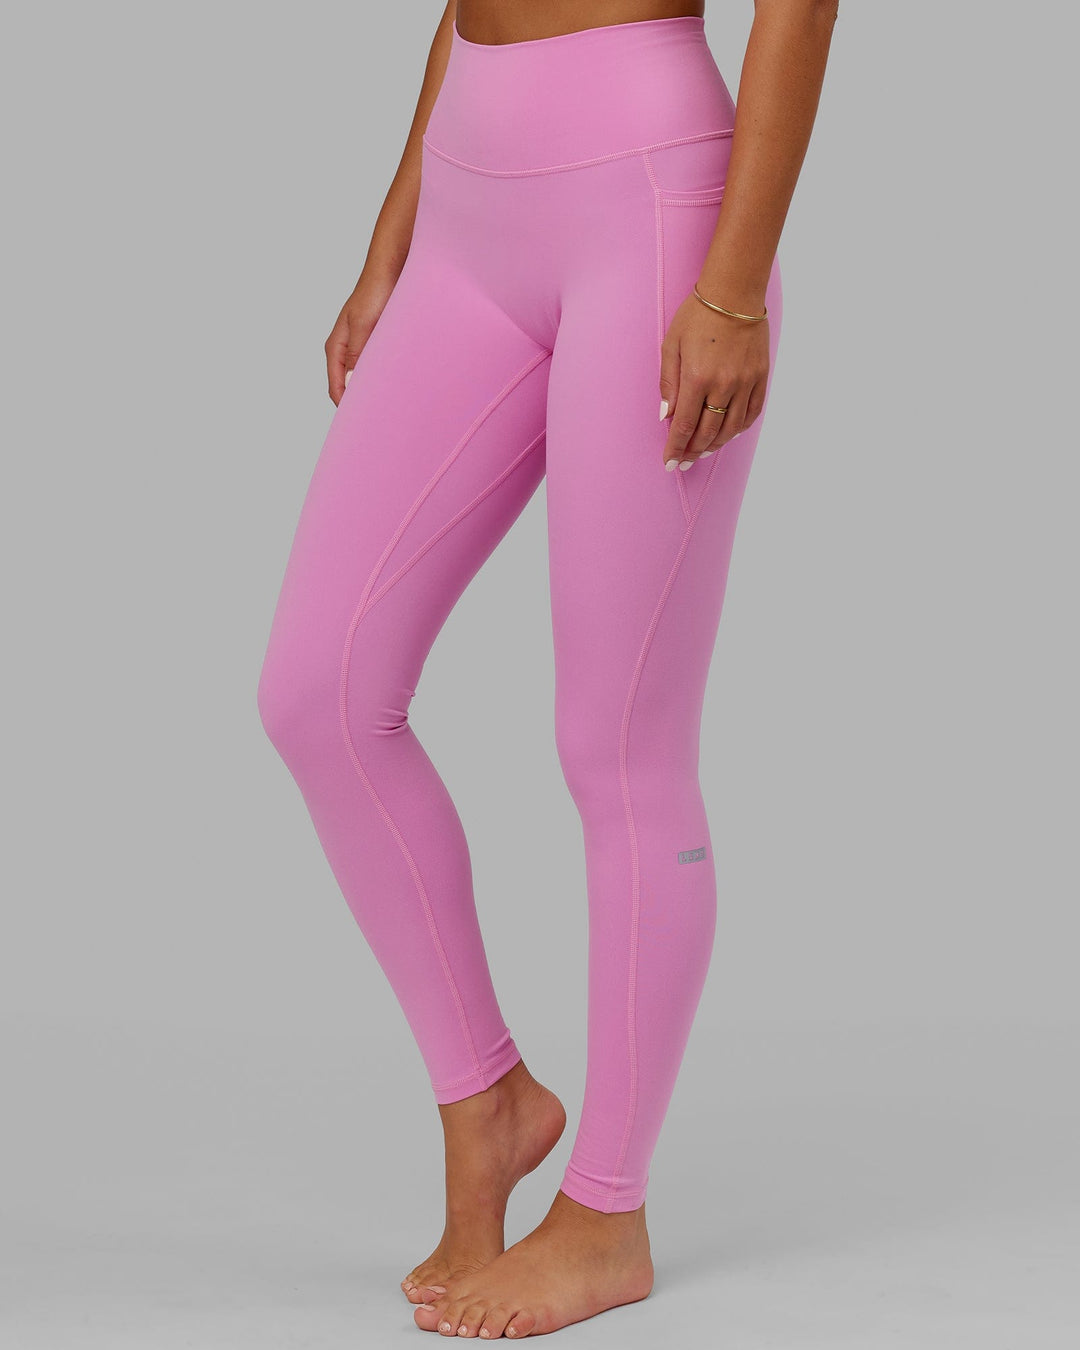 Woman wearing Fusion X-long Tight - Spark Pink